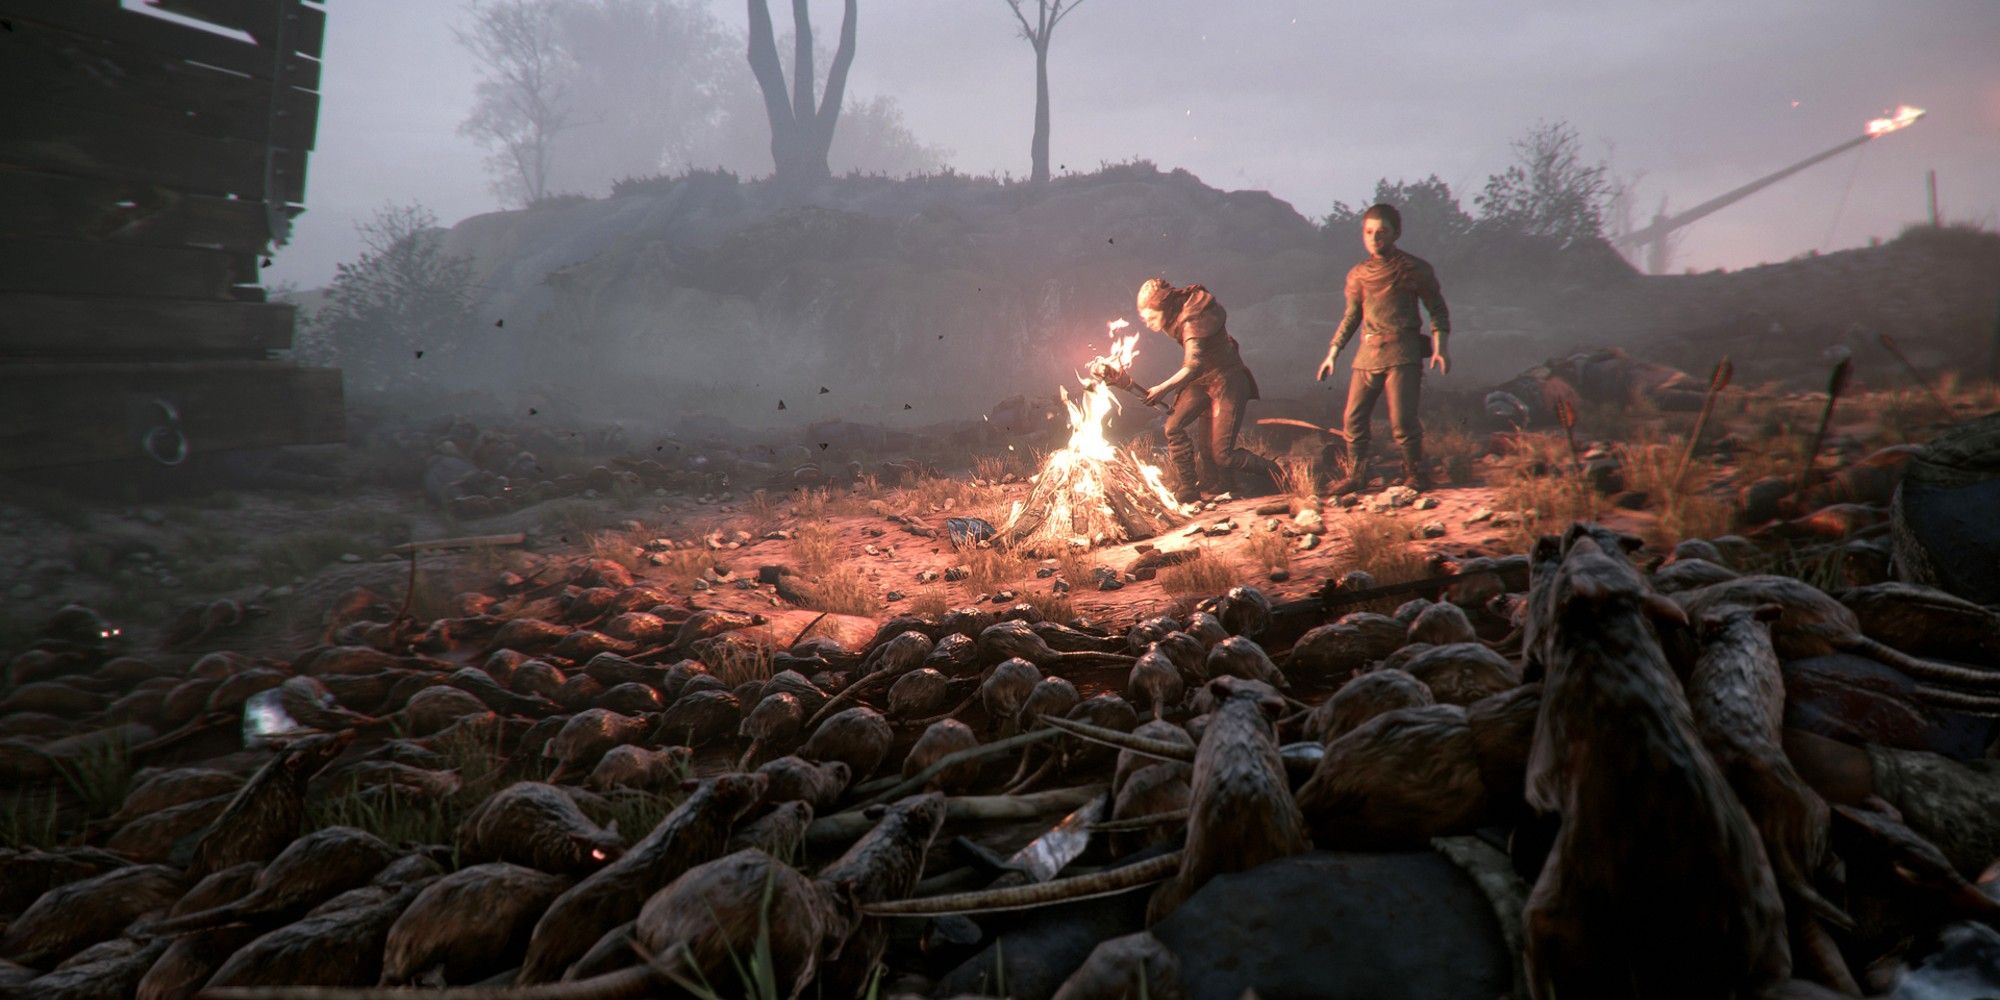 The two protagonists fending off a rat horde in A Plague Tale